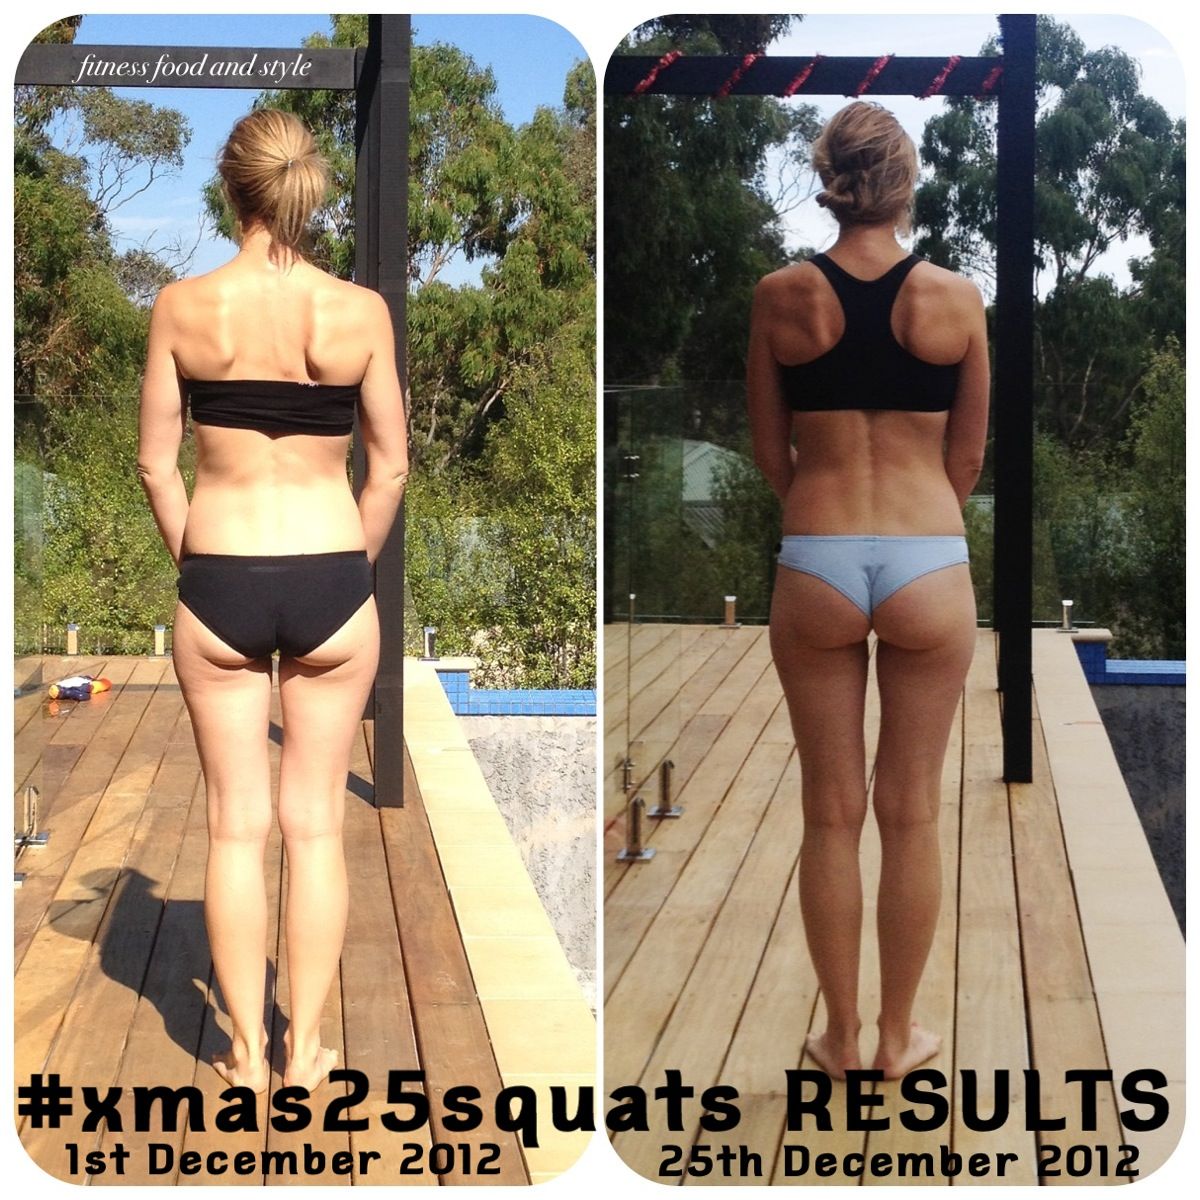 Squat challenge. Before and after.